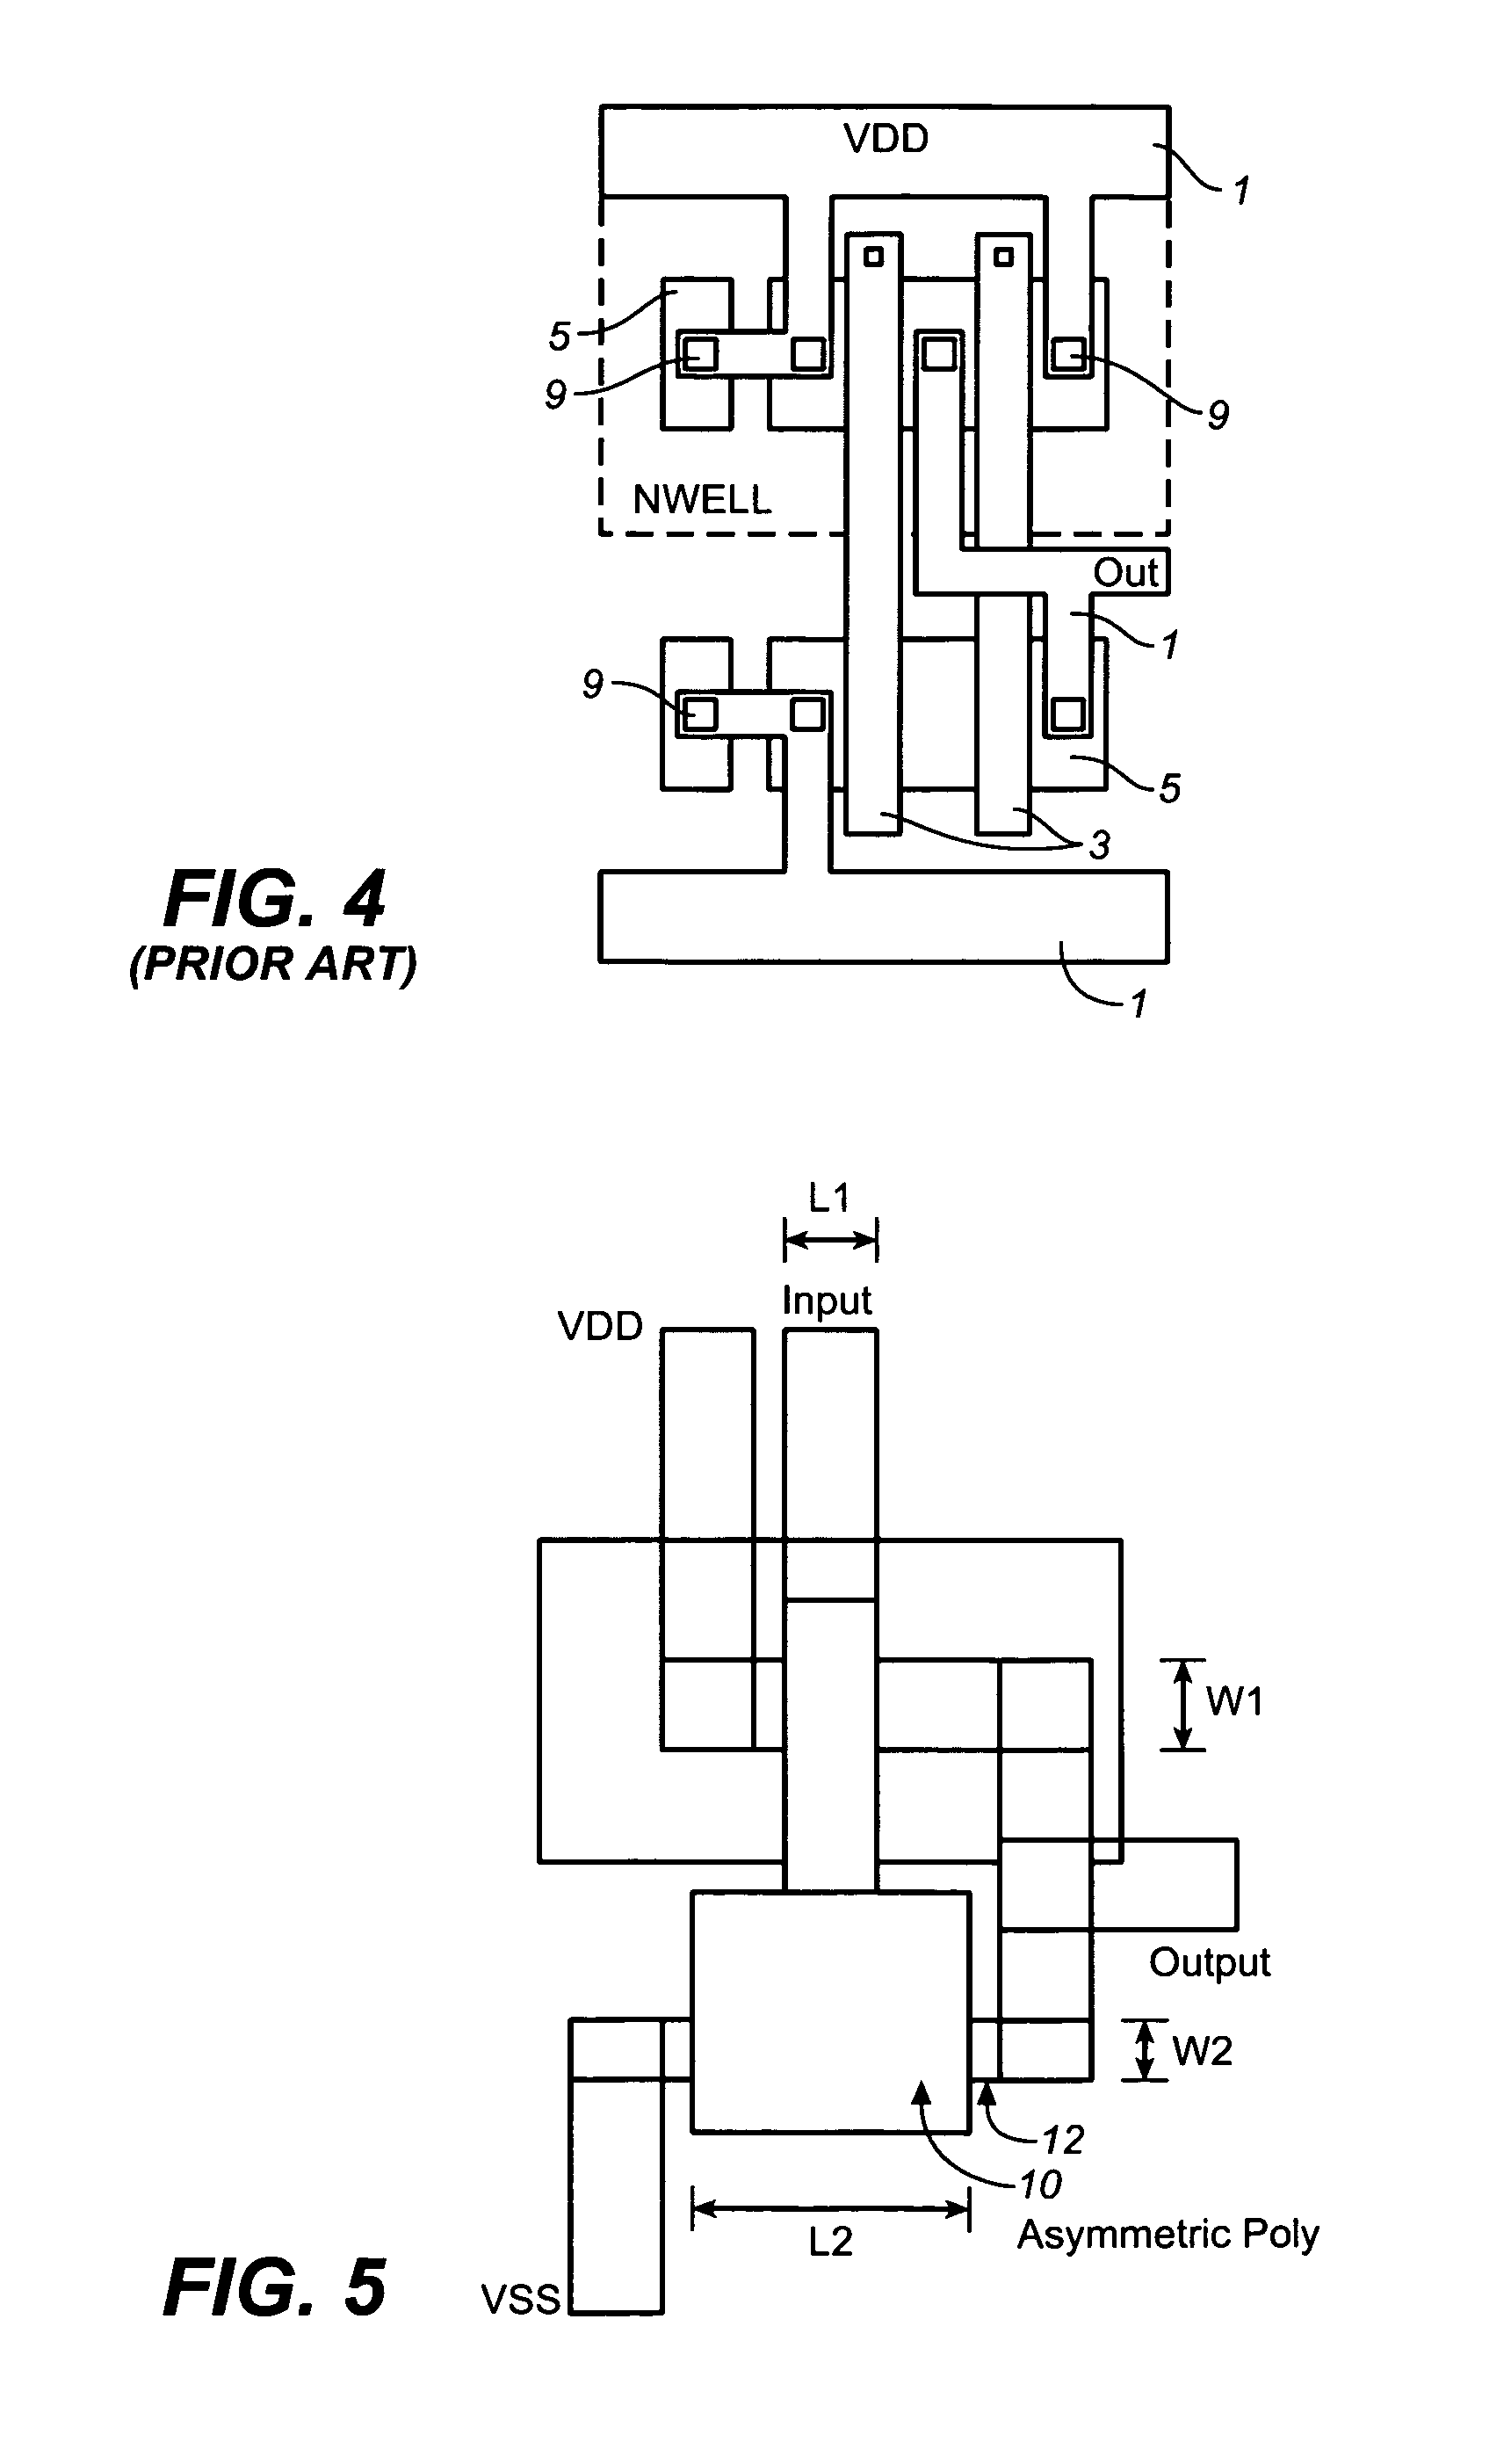 Asymmetrical layout for complementary metal-oxide-semiconductor integrated circuit to reduce power consumption